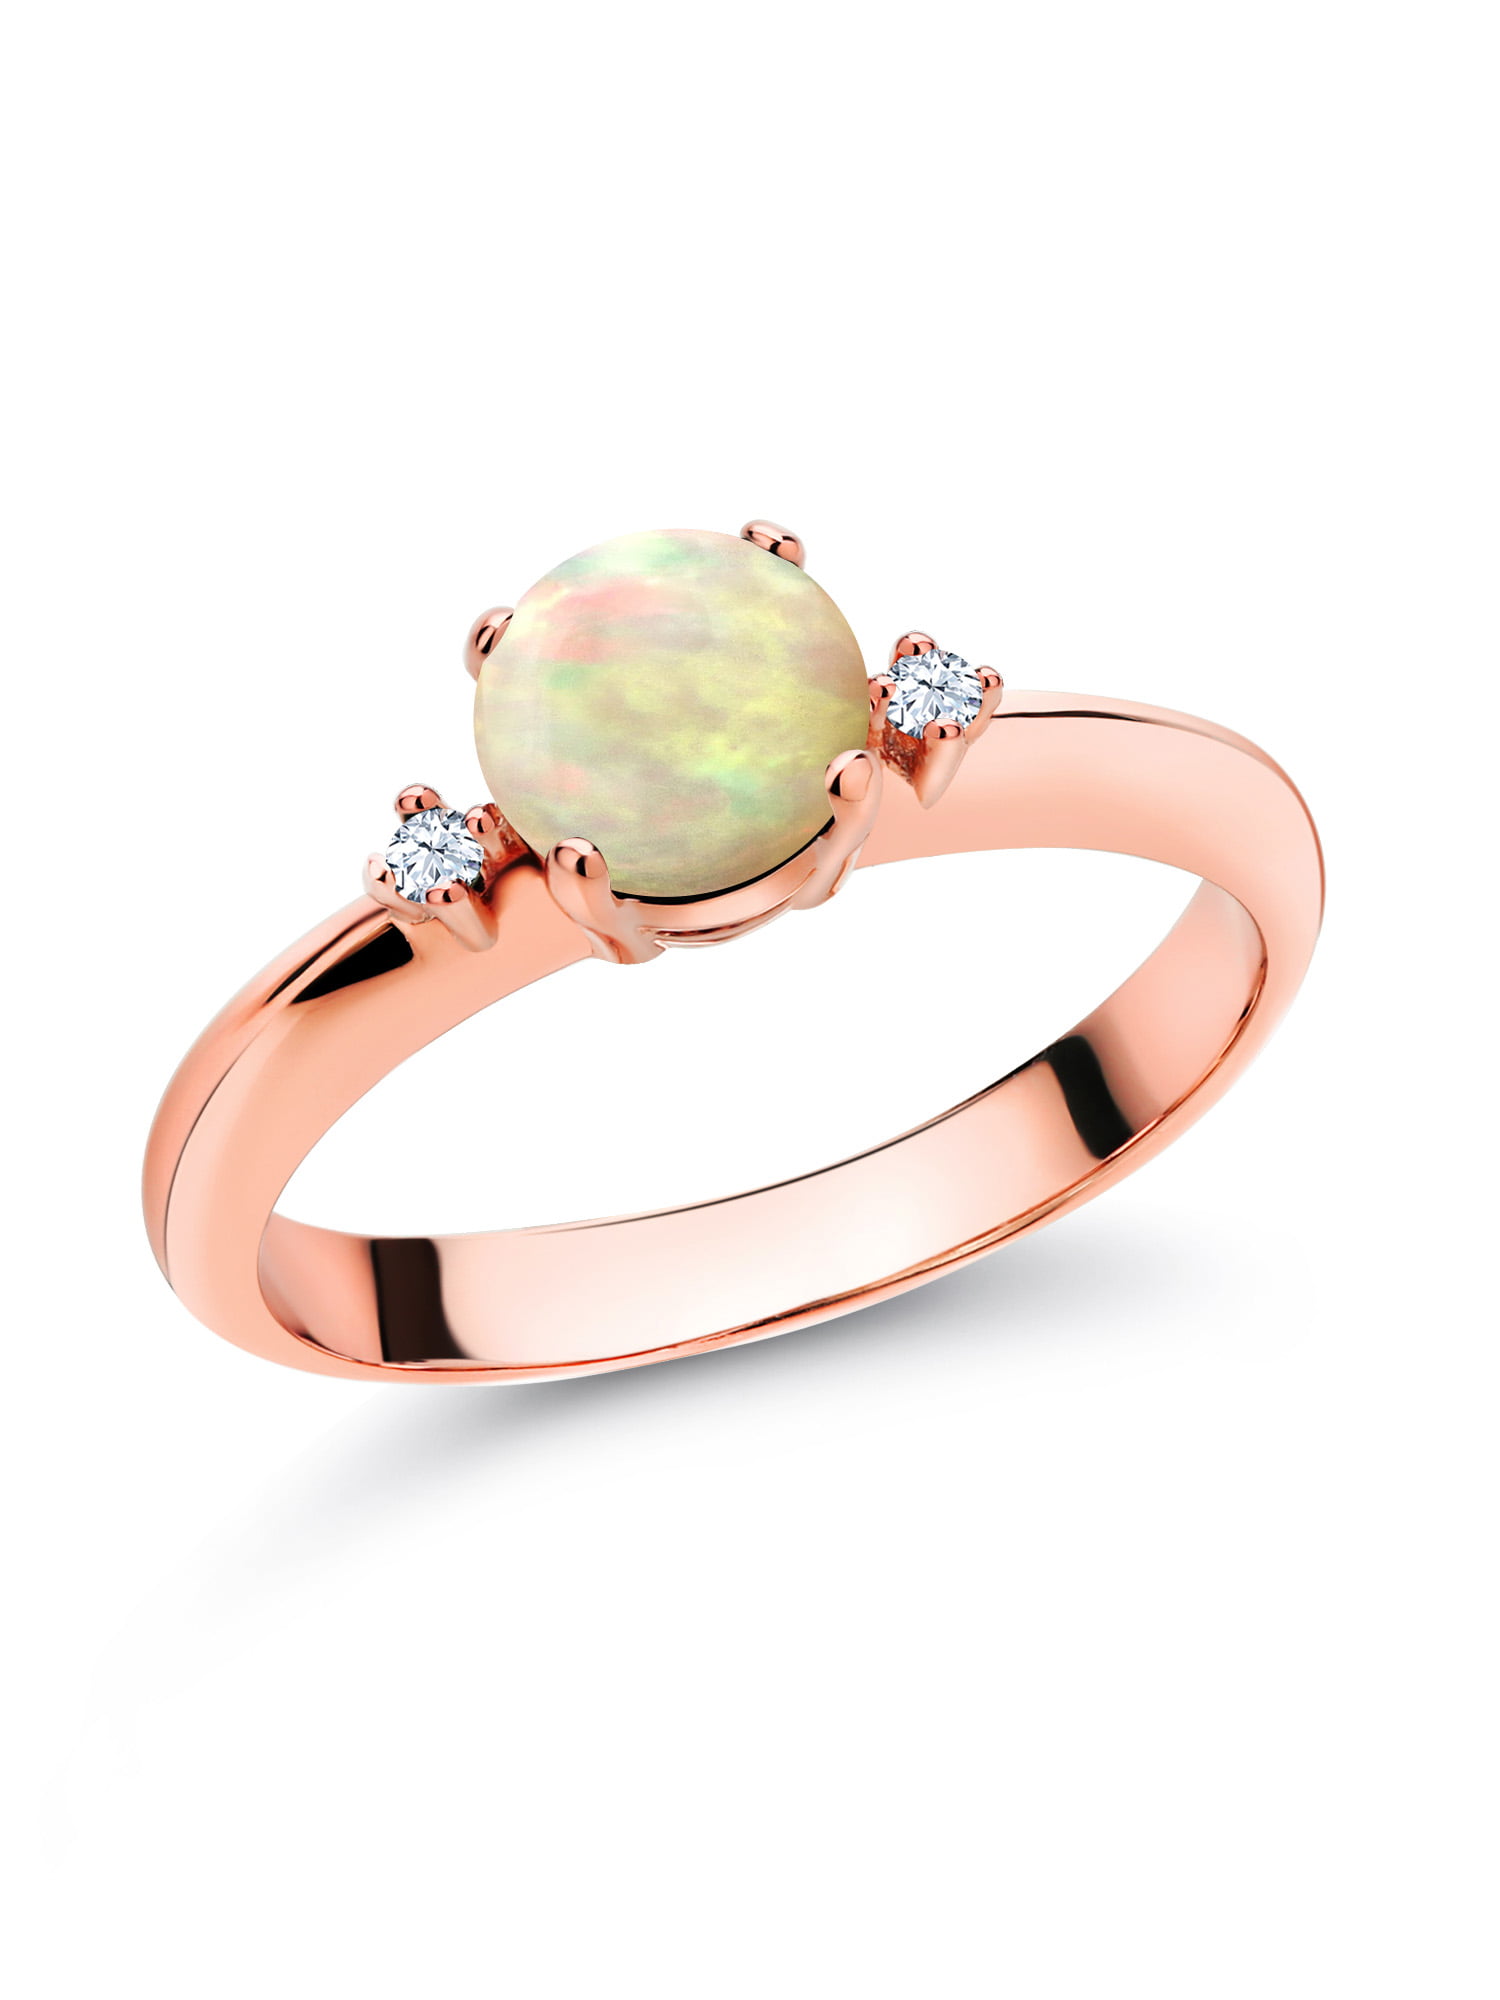 Gem Stone King 0.59 Ct Round Cabochon White Ethiopian Opal 18K Rose Gold  Plated Silver 3-Stone Engagement Ring